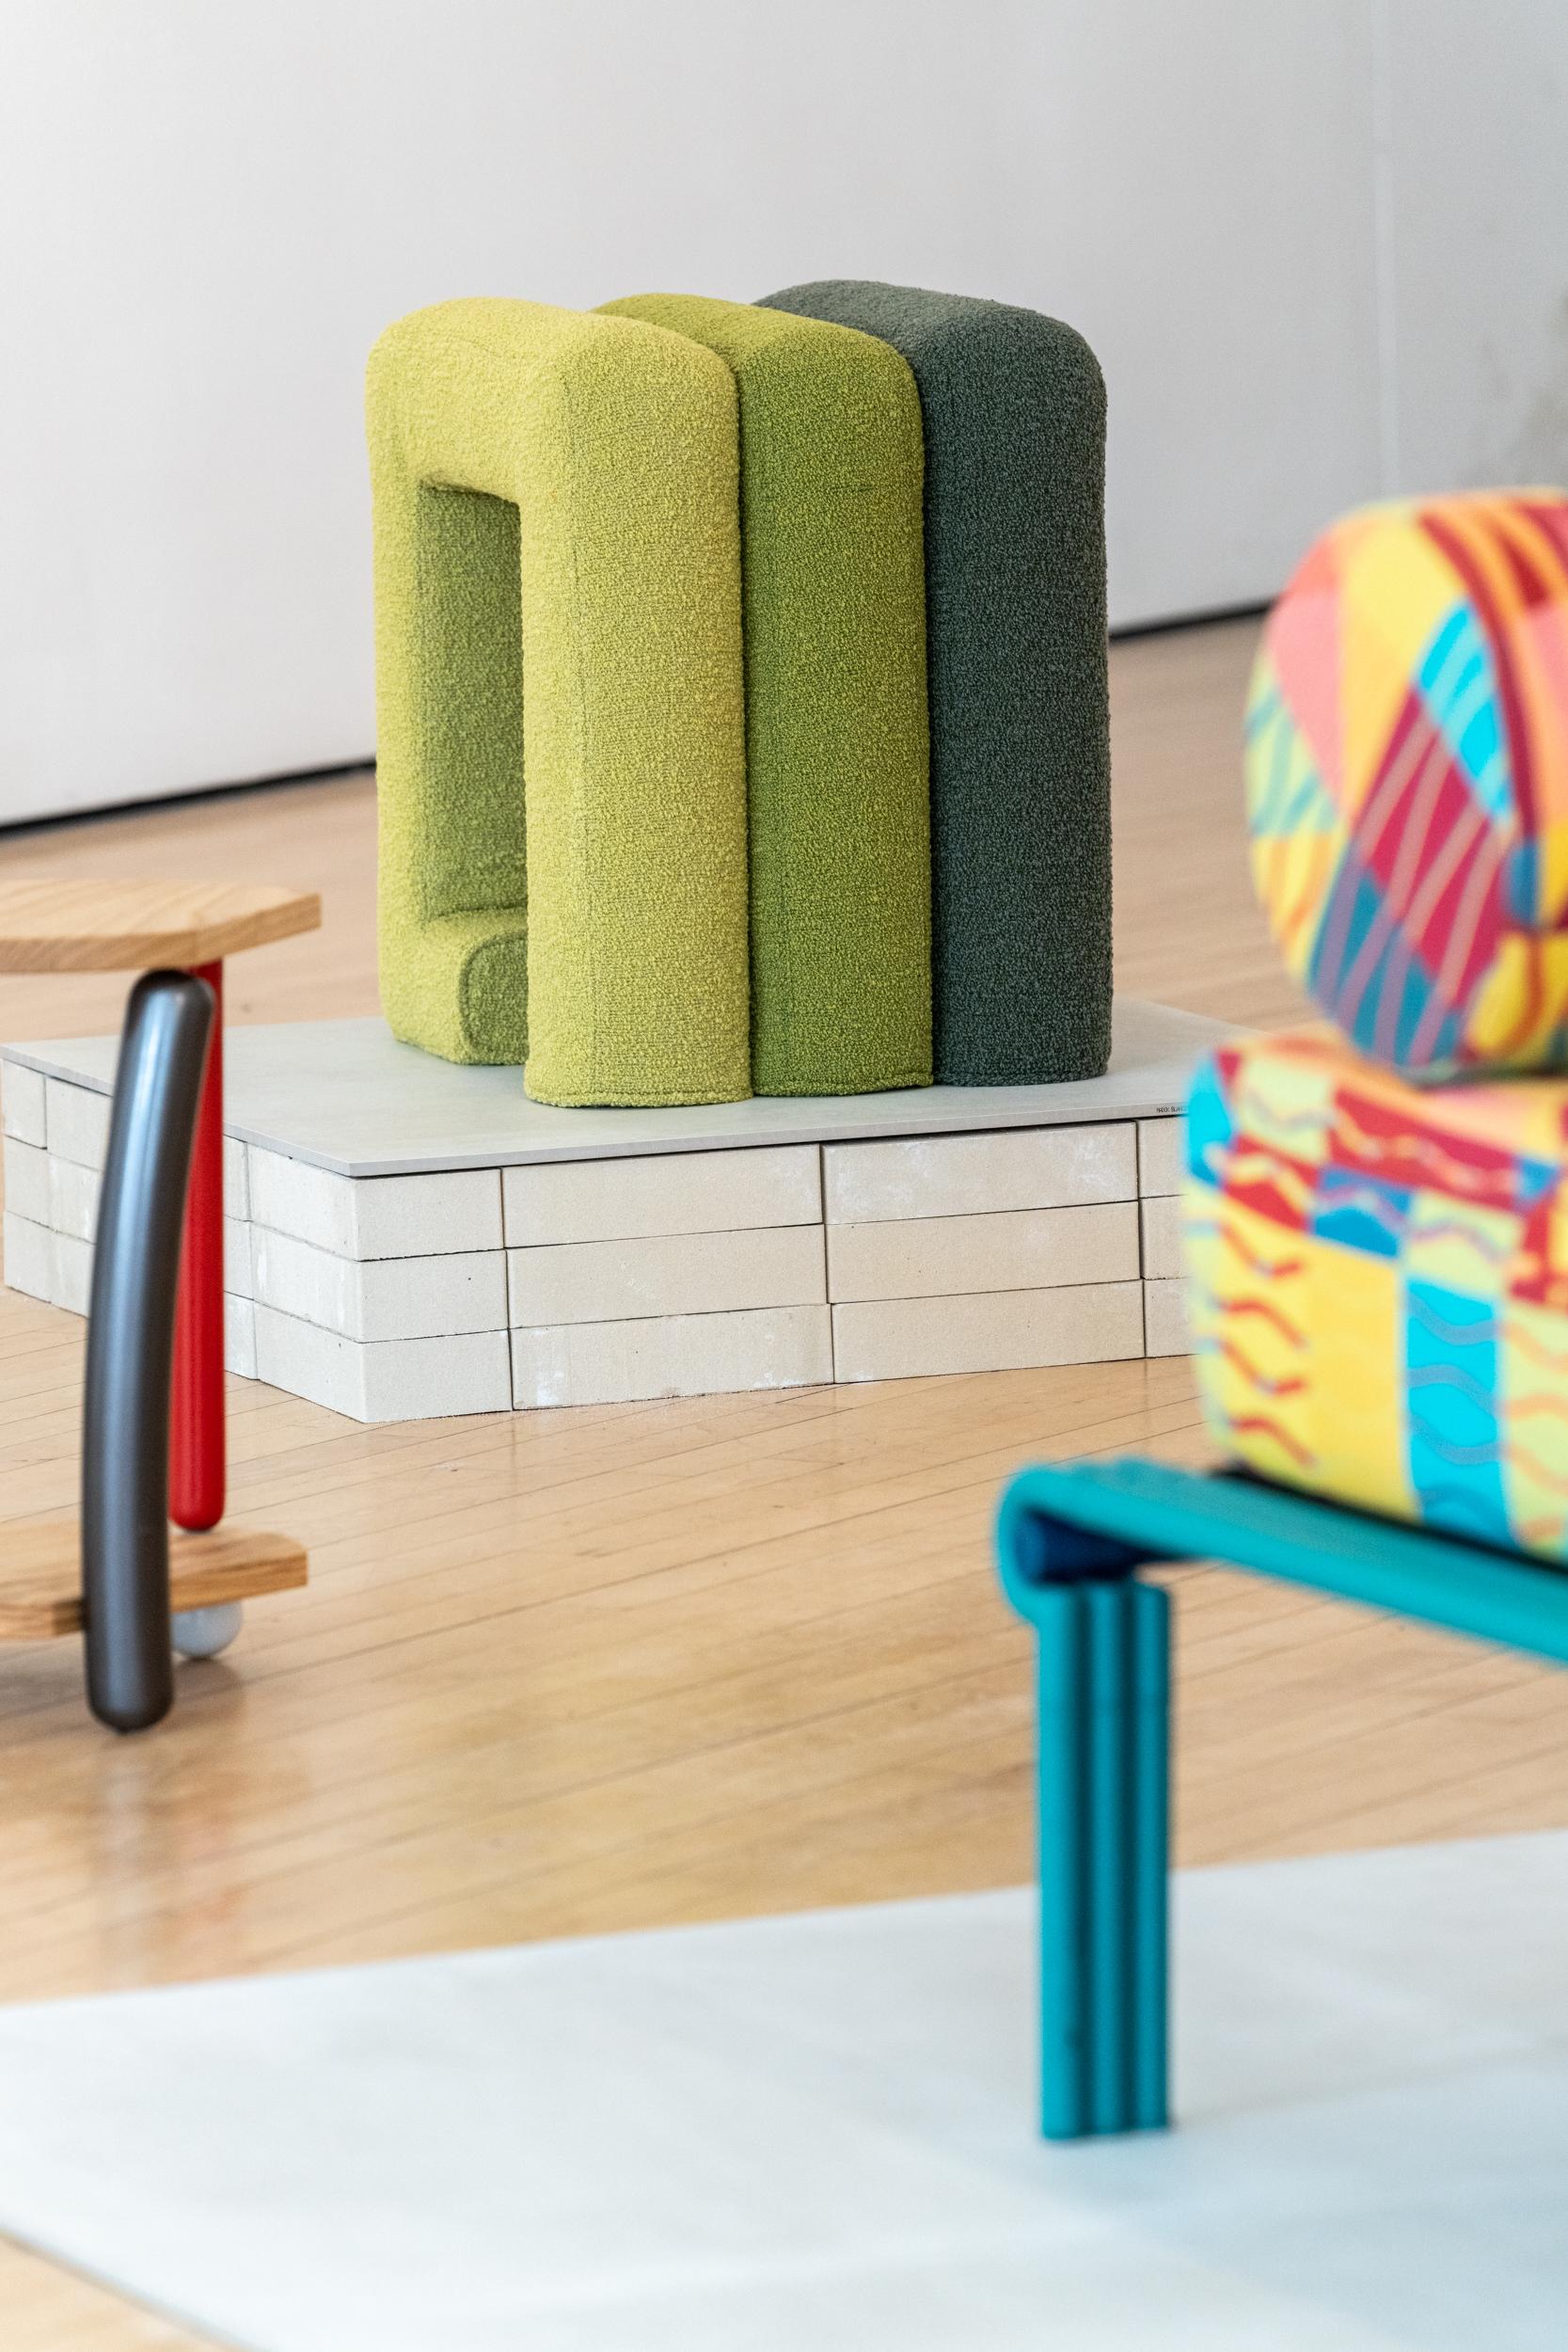 Meta is a metamorphosis from one object to another.

The stool uses an interlocking system that joins the sections together, making it a modular and interchangeable product based on the user’s choice of colours.

The stool can be extended into a